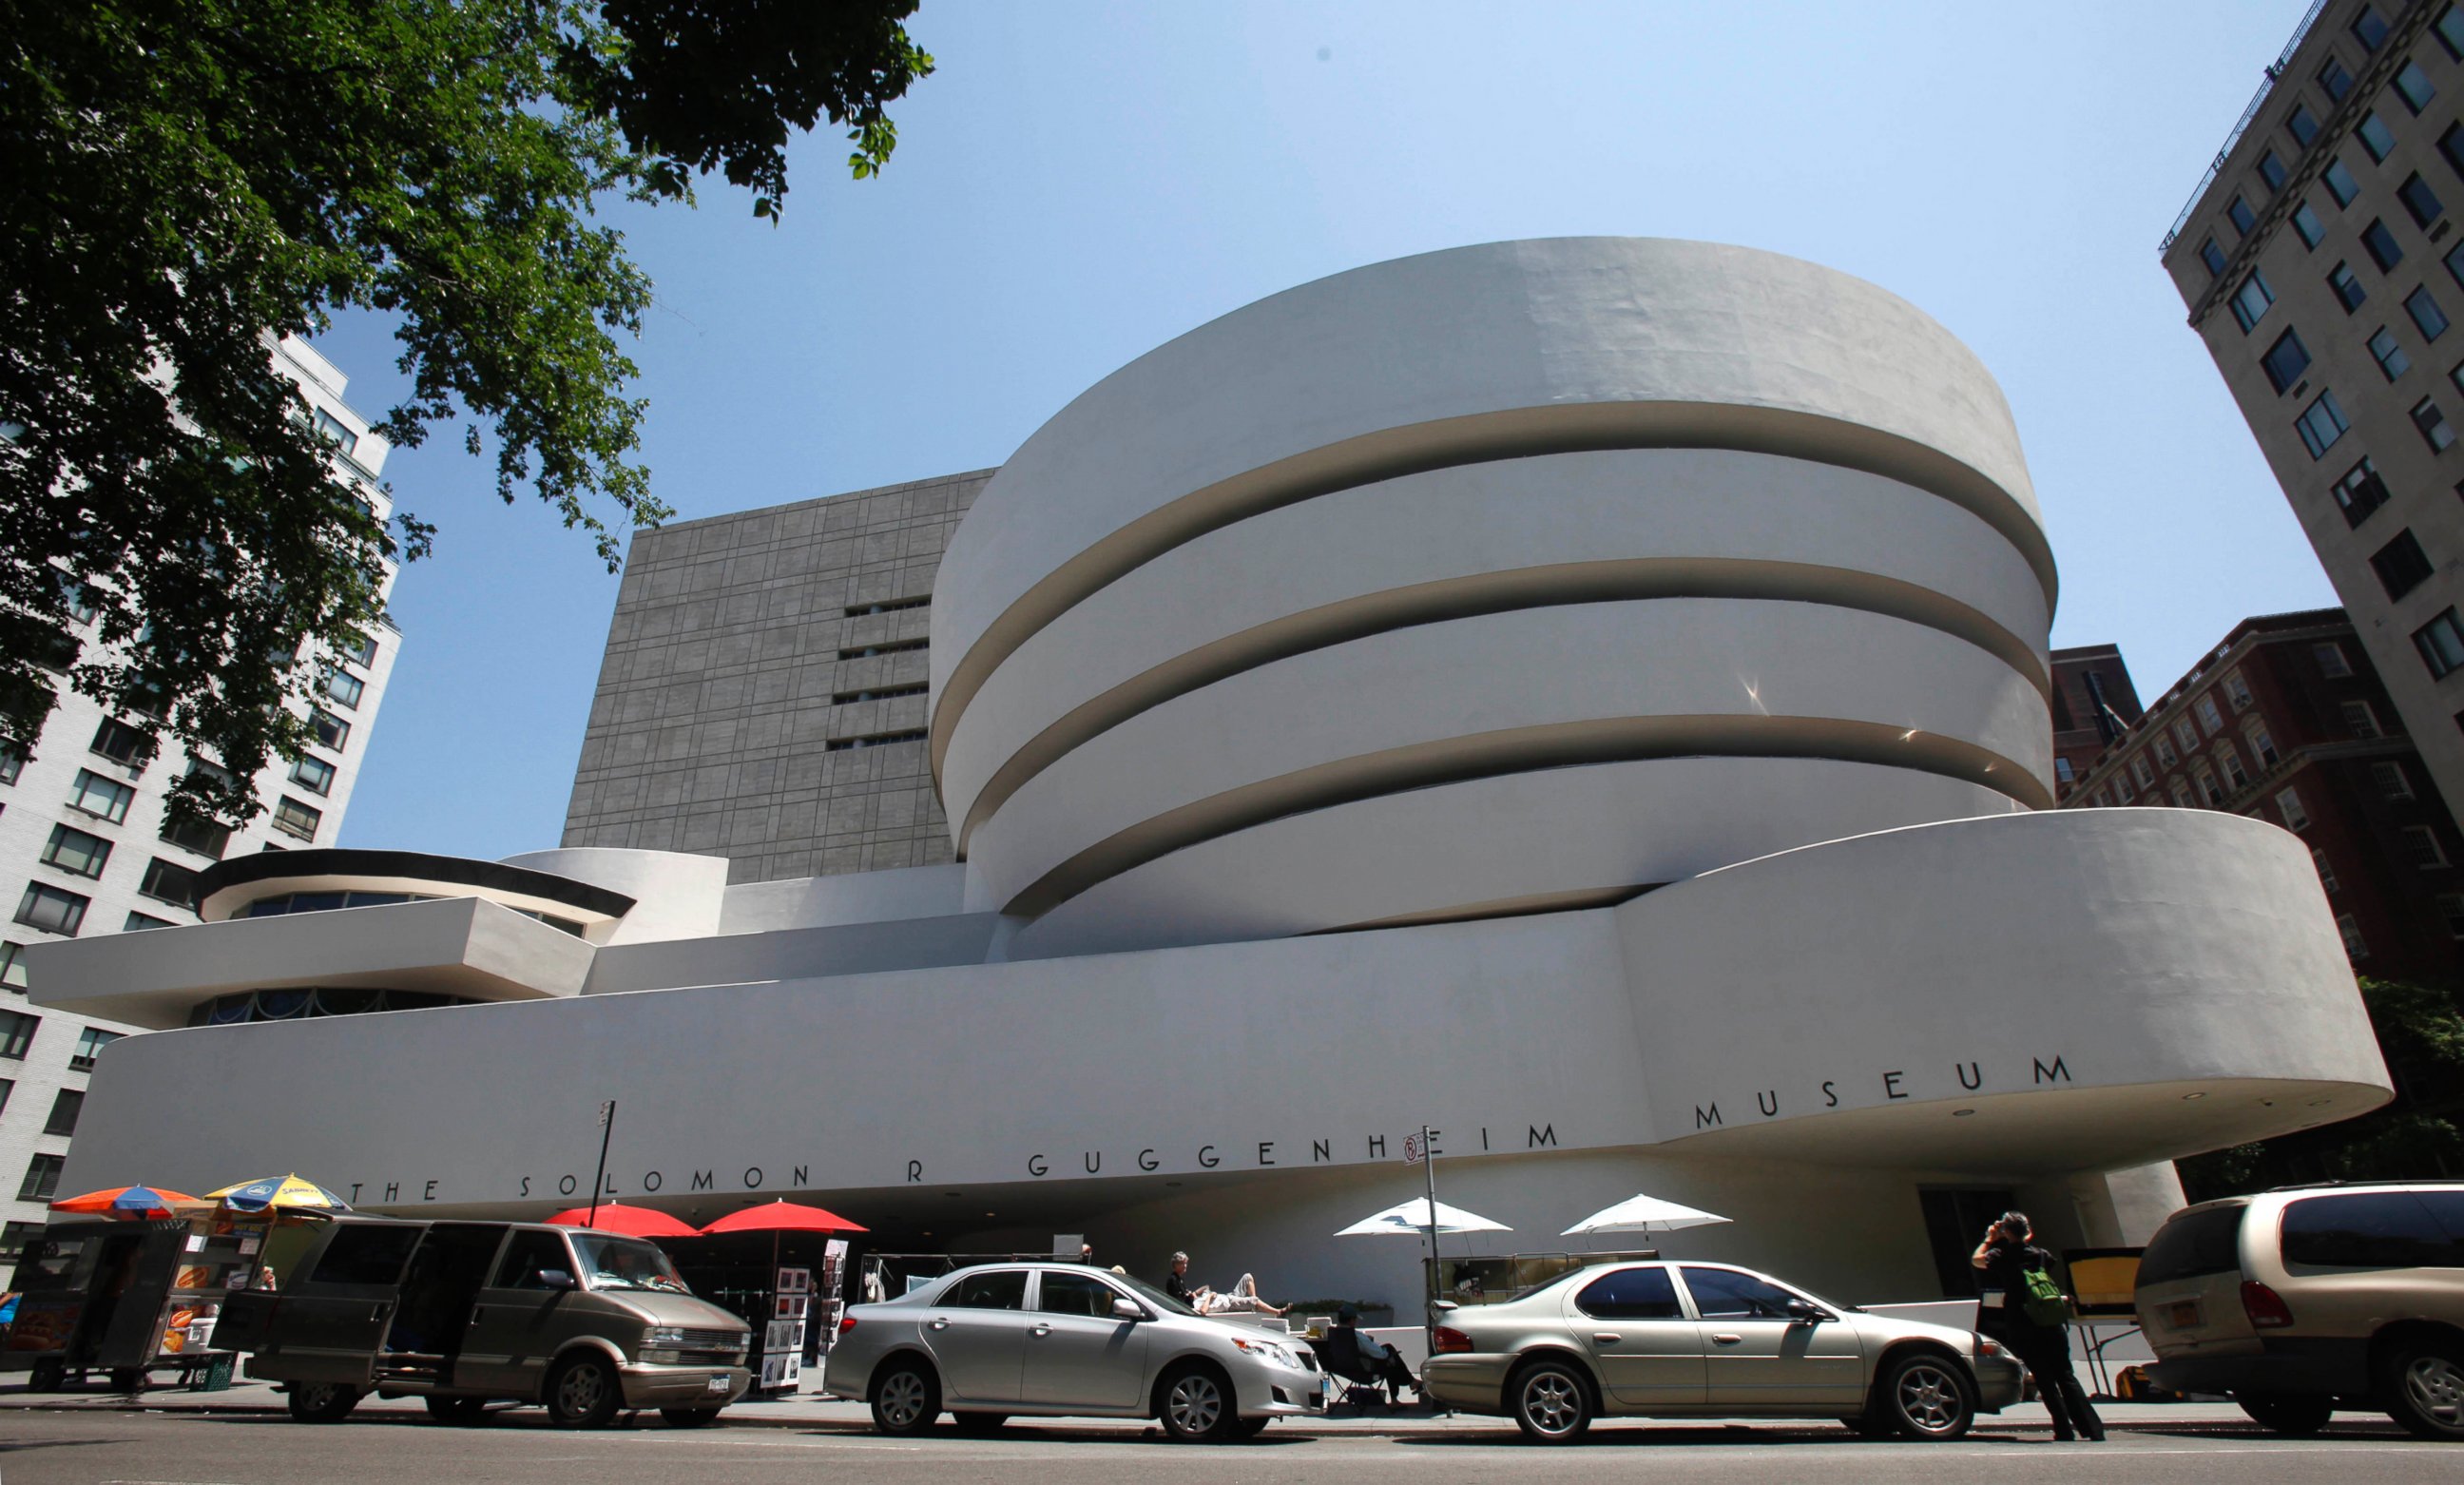 PHOTO: This May 31, 2011 file photo shows the exterior of Frank Lloyd Wright's Solomon R. Guggenheim Museum in New York.